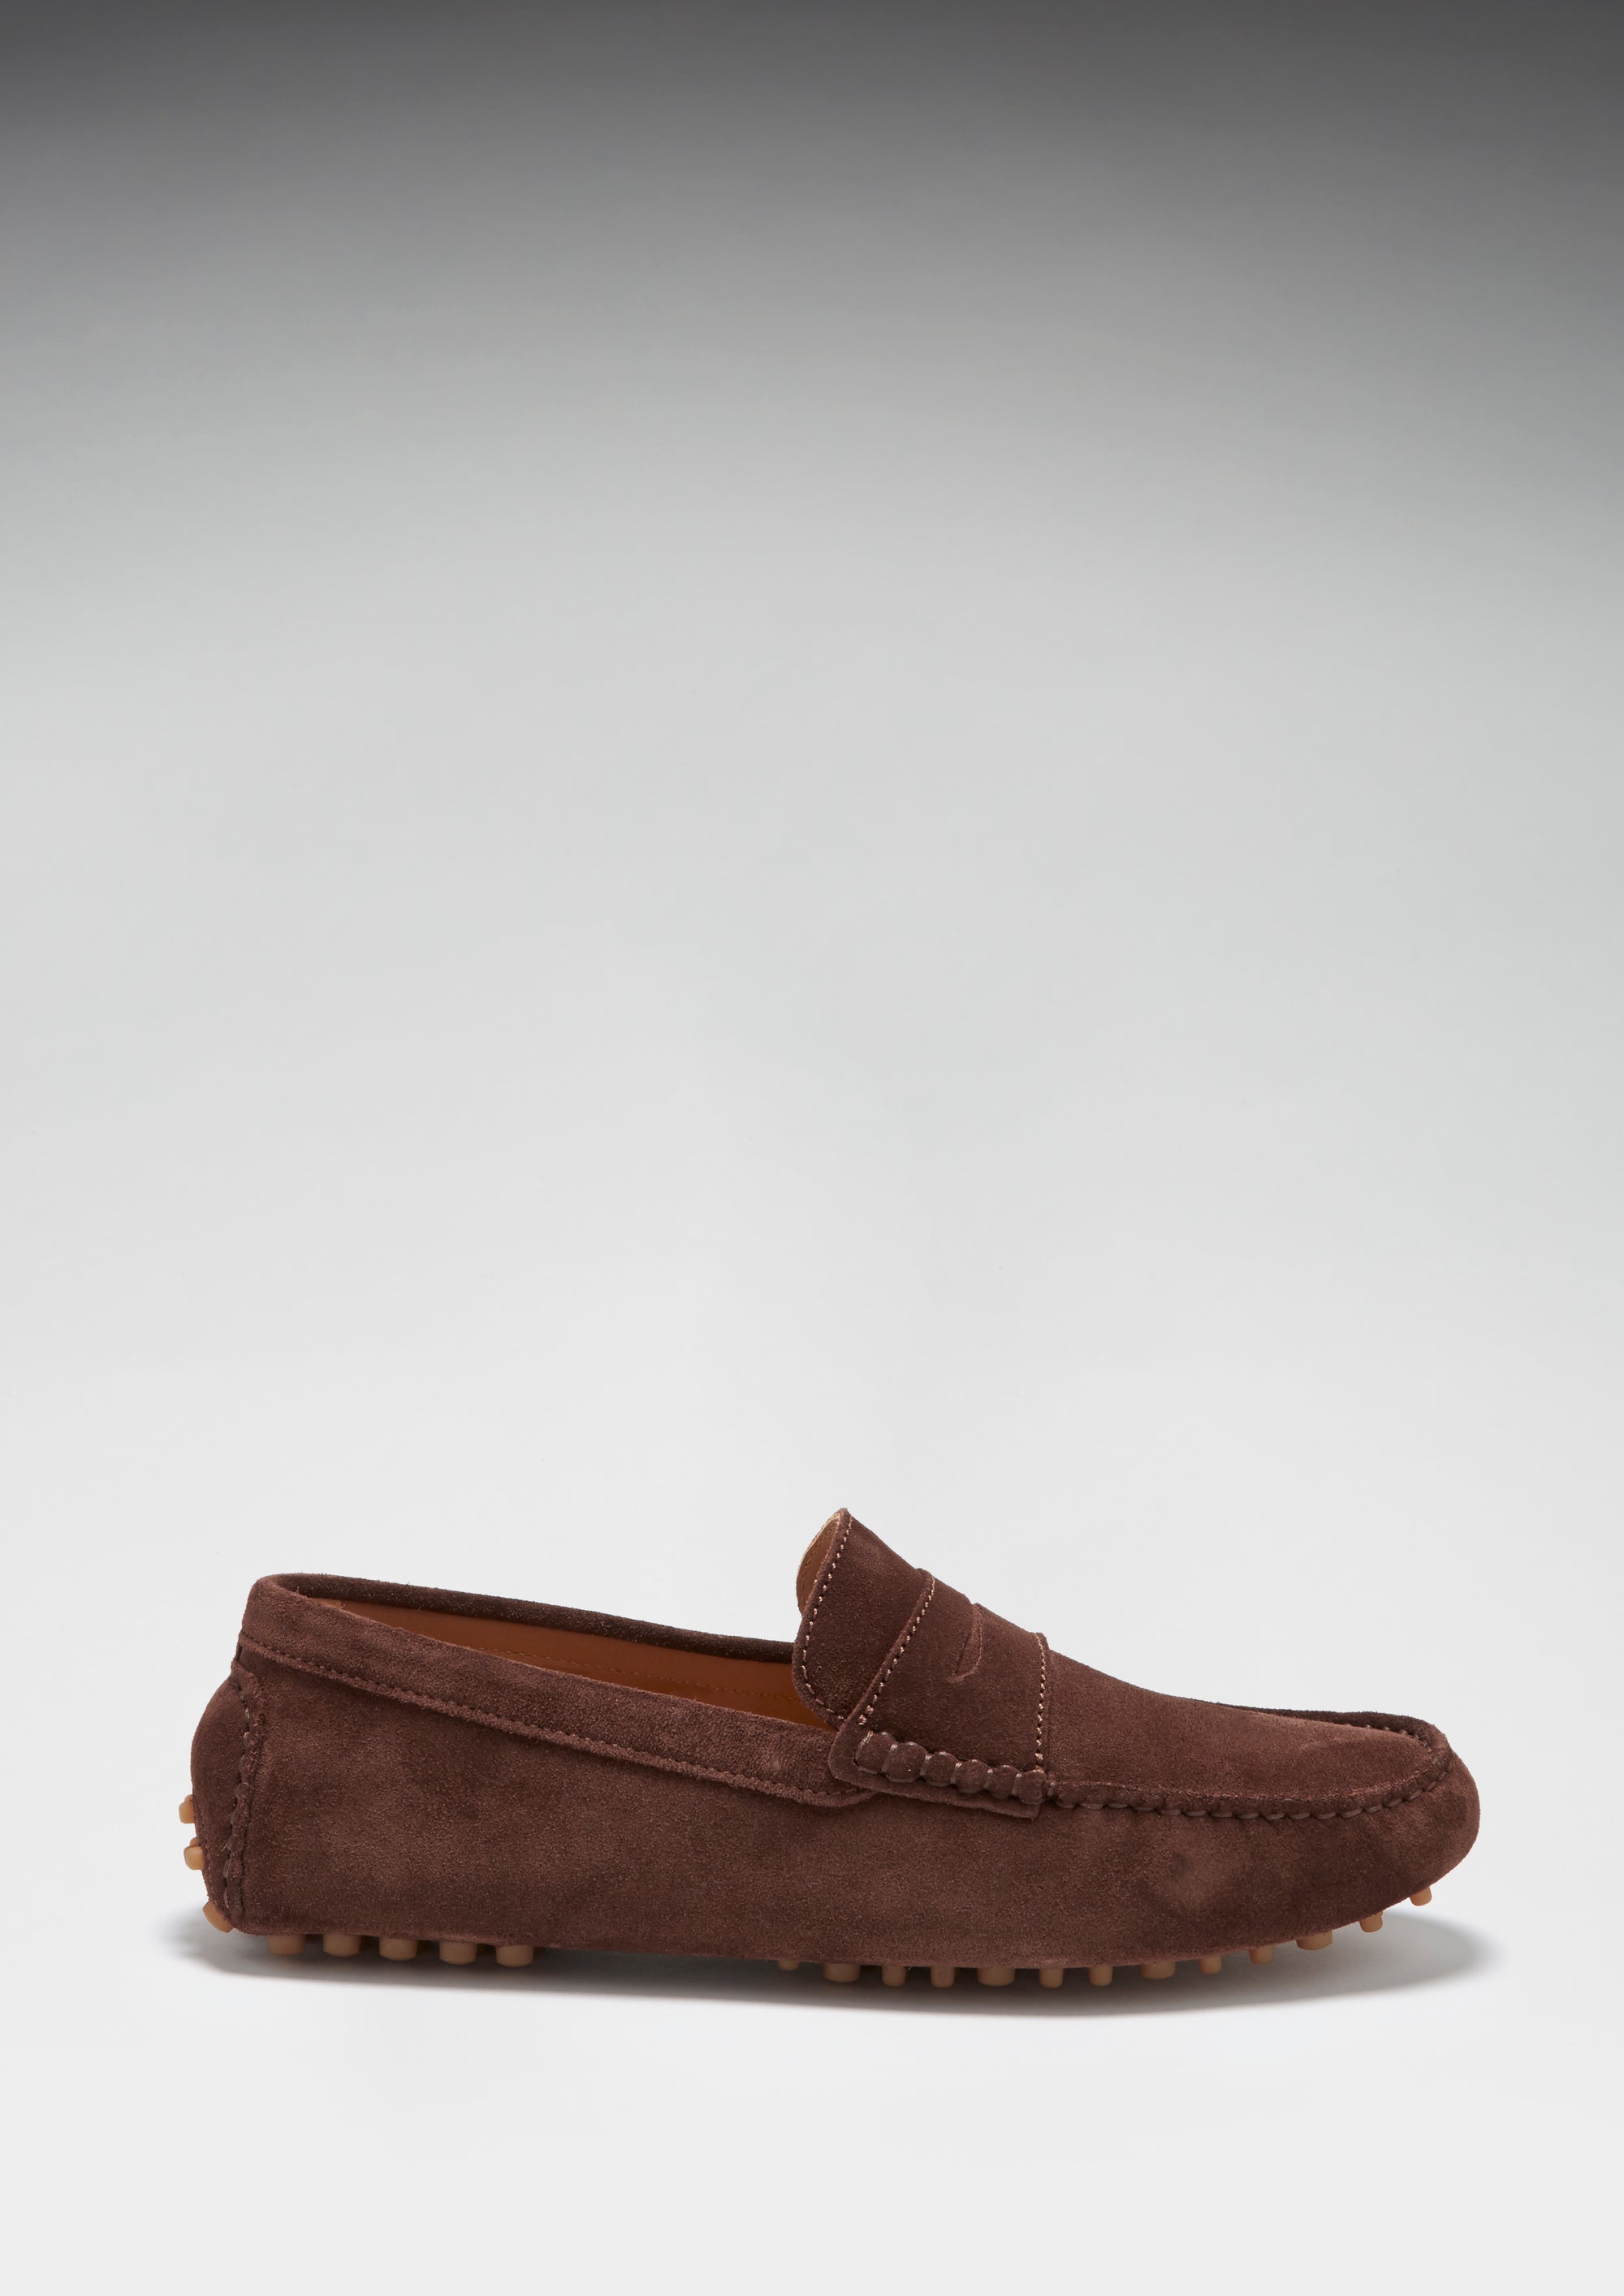 Penny Driving Loafers, brown suede